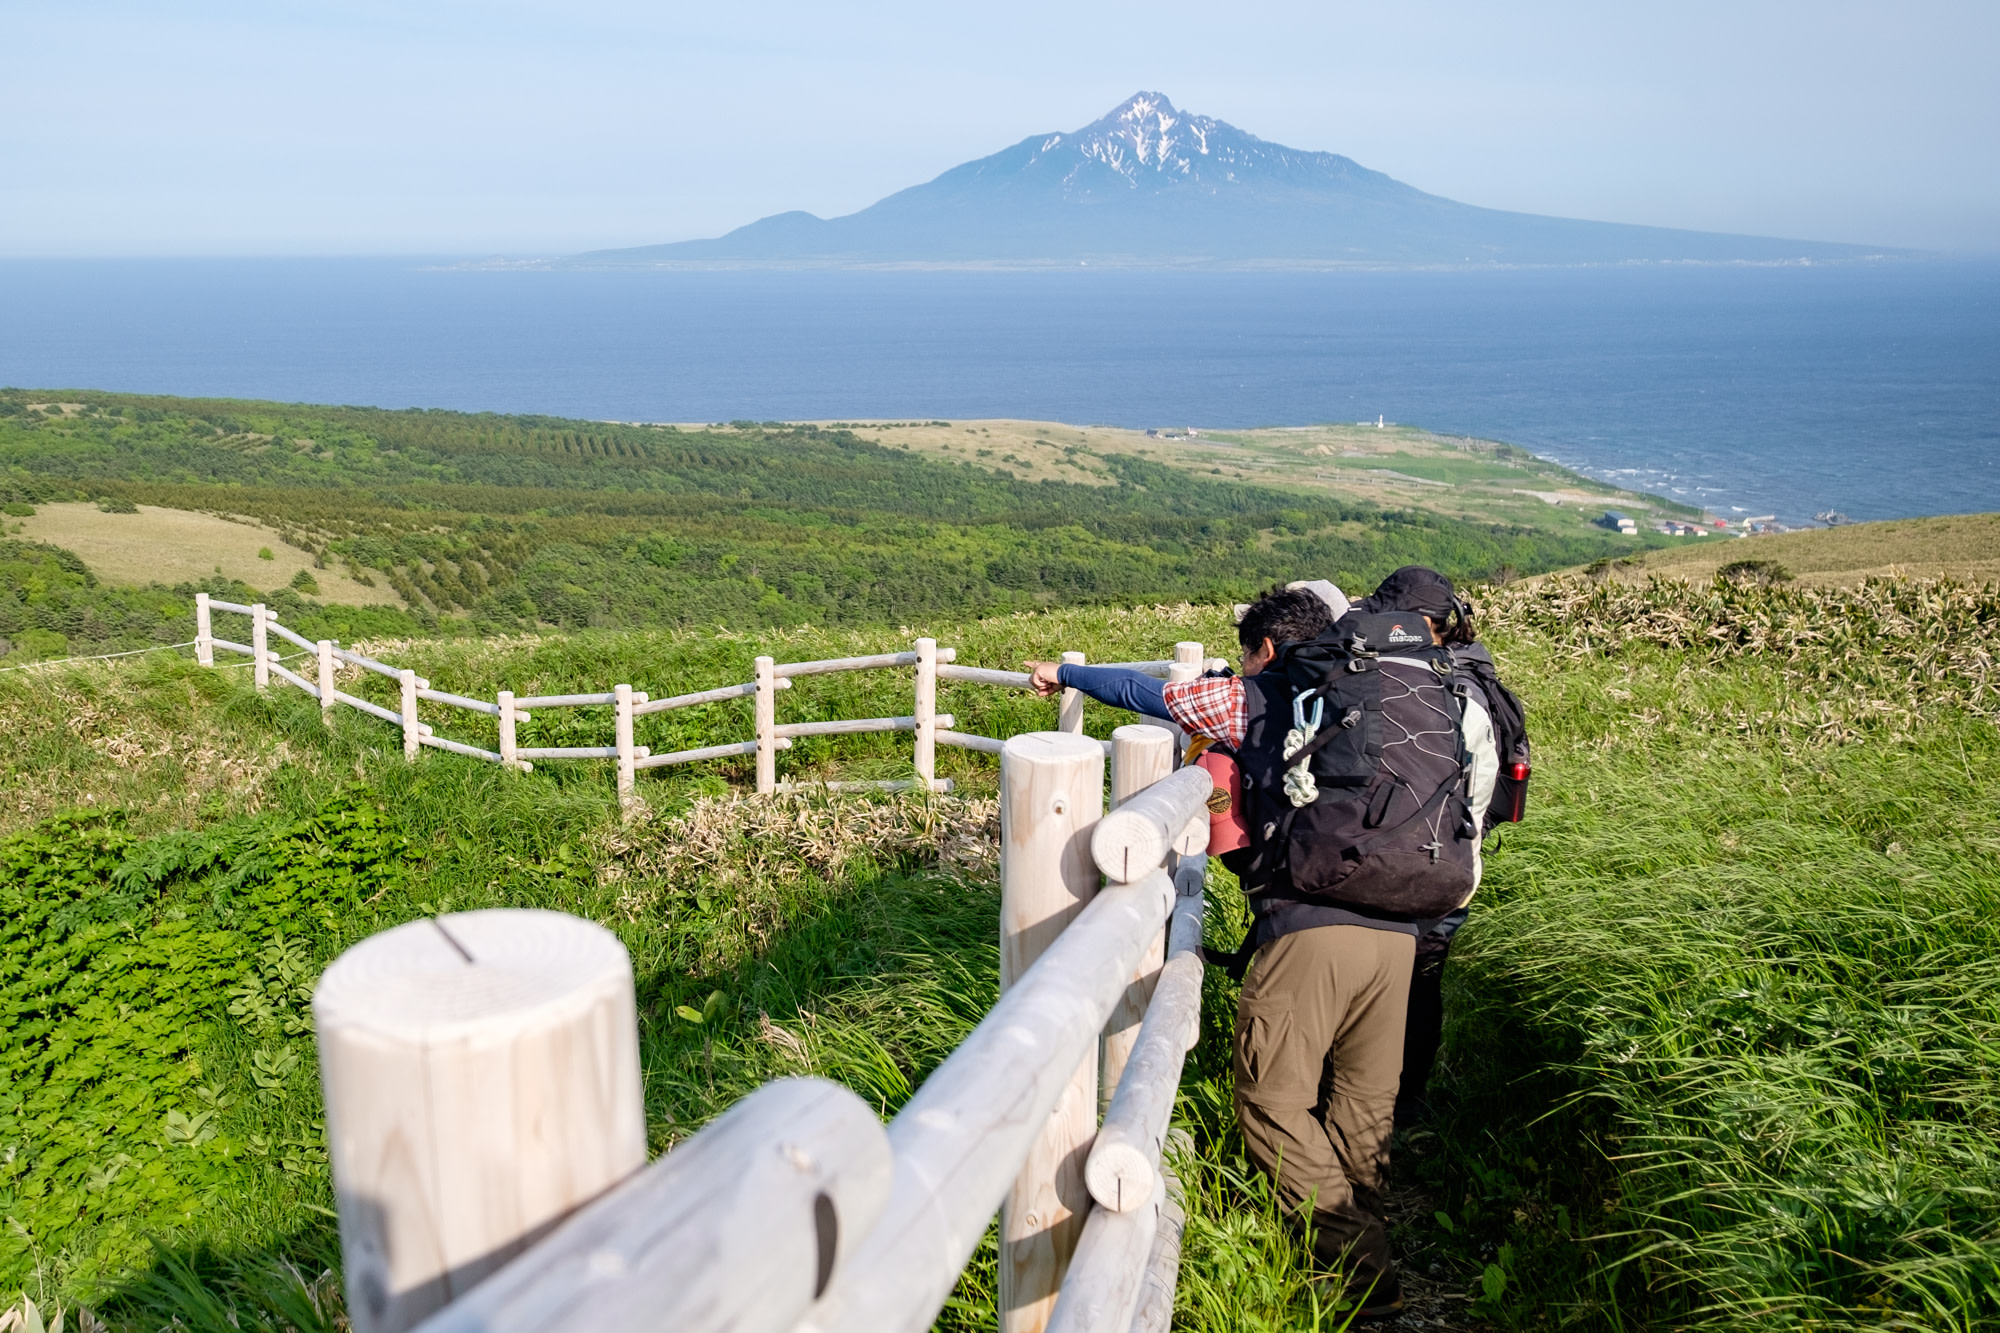 Hikers on a coastal trail with with Mount Rishiri visible across the sea